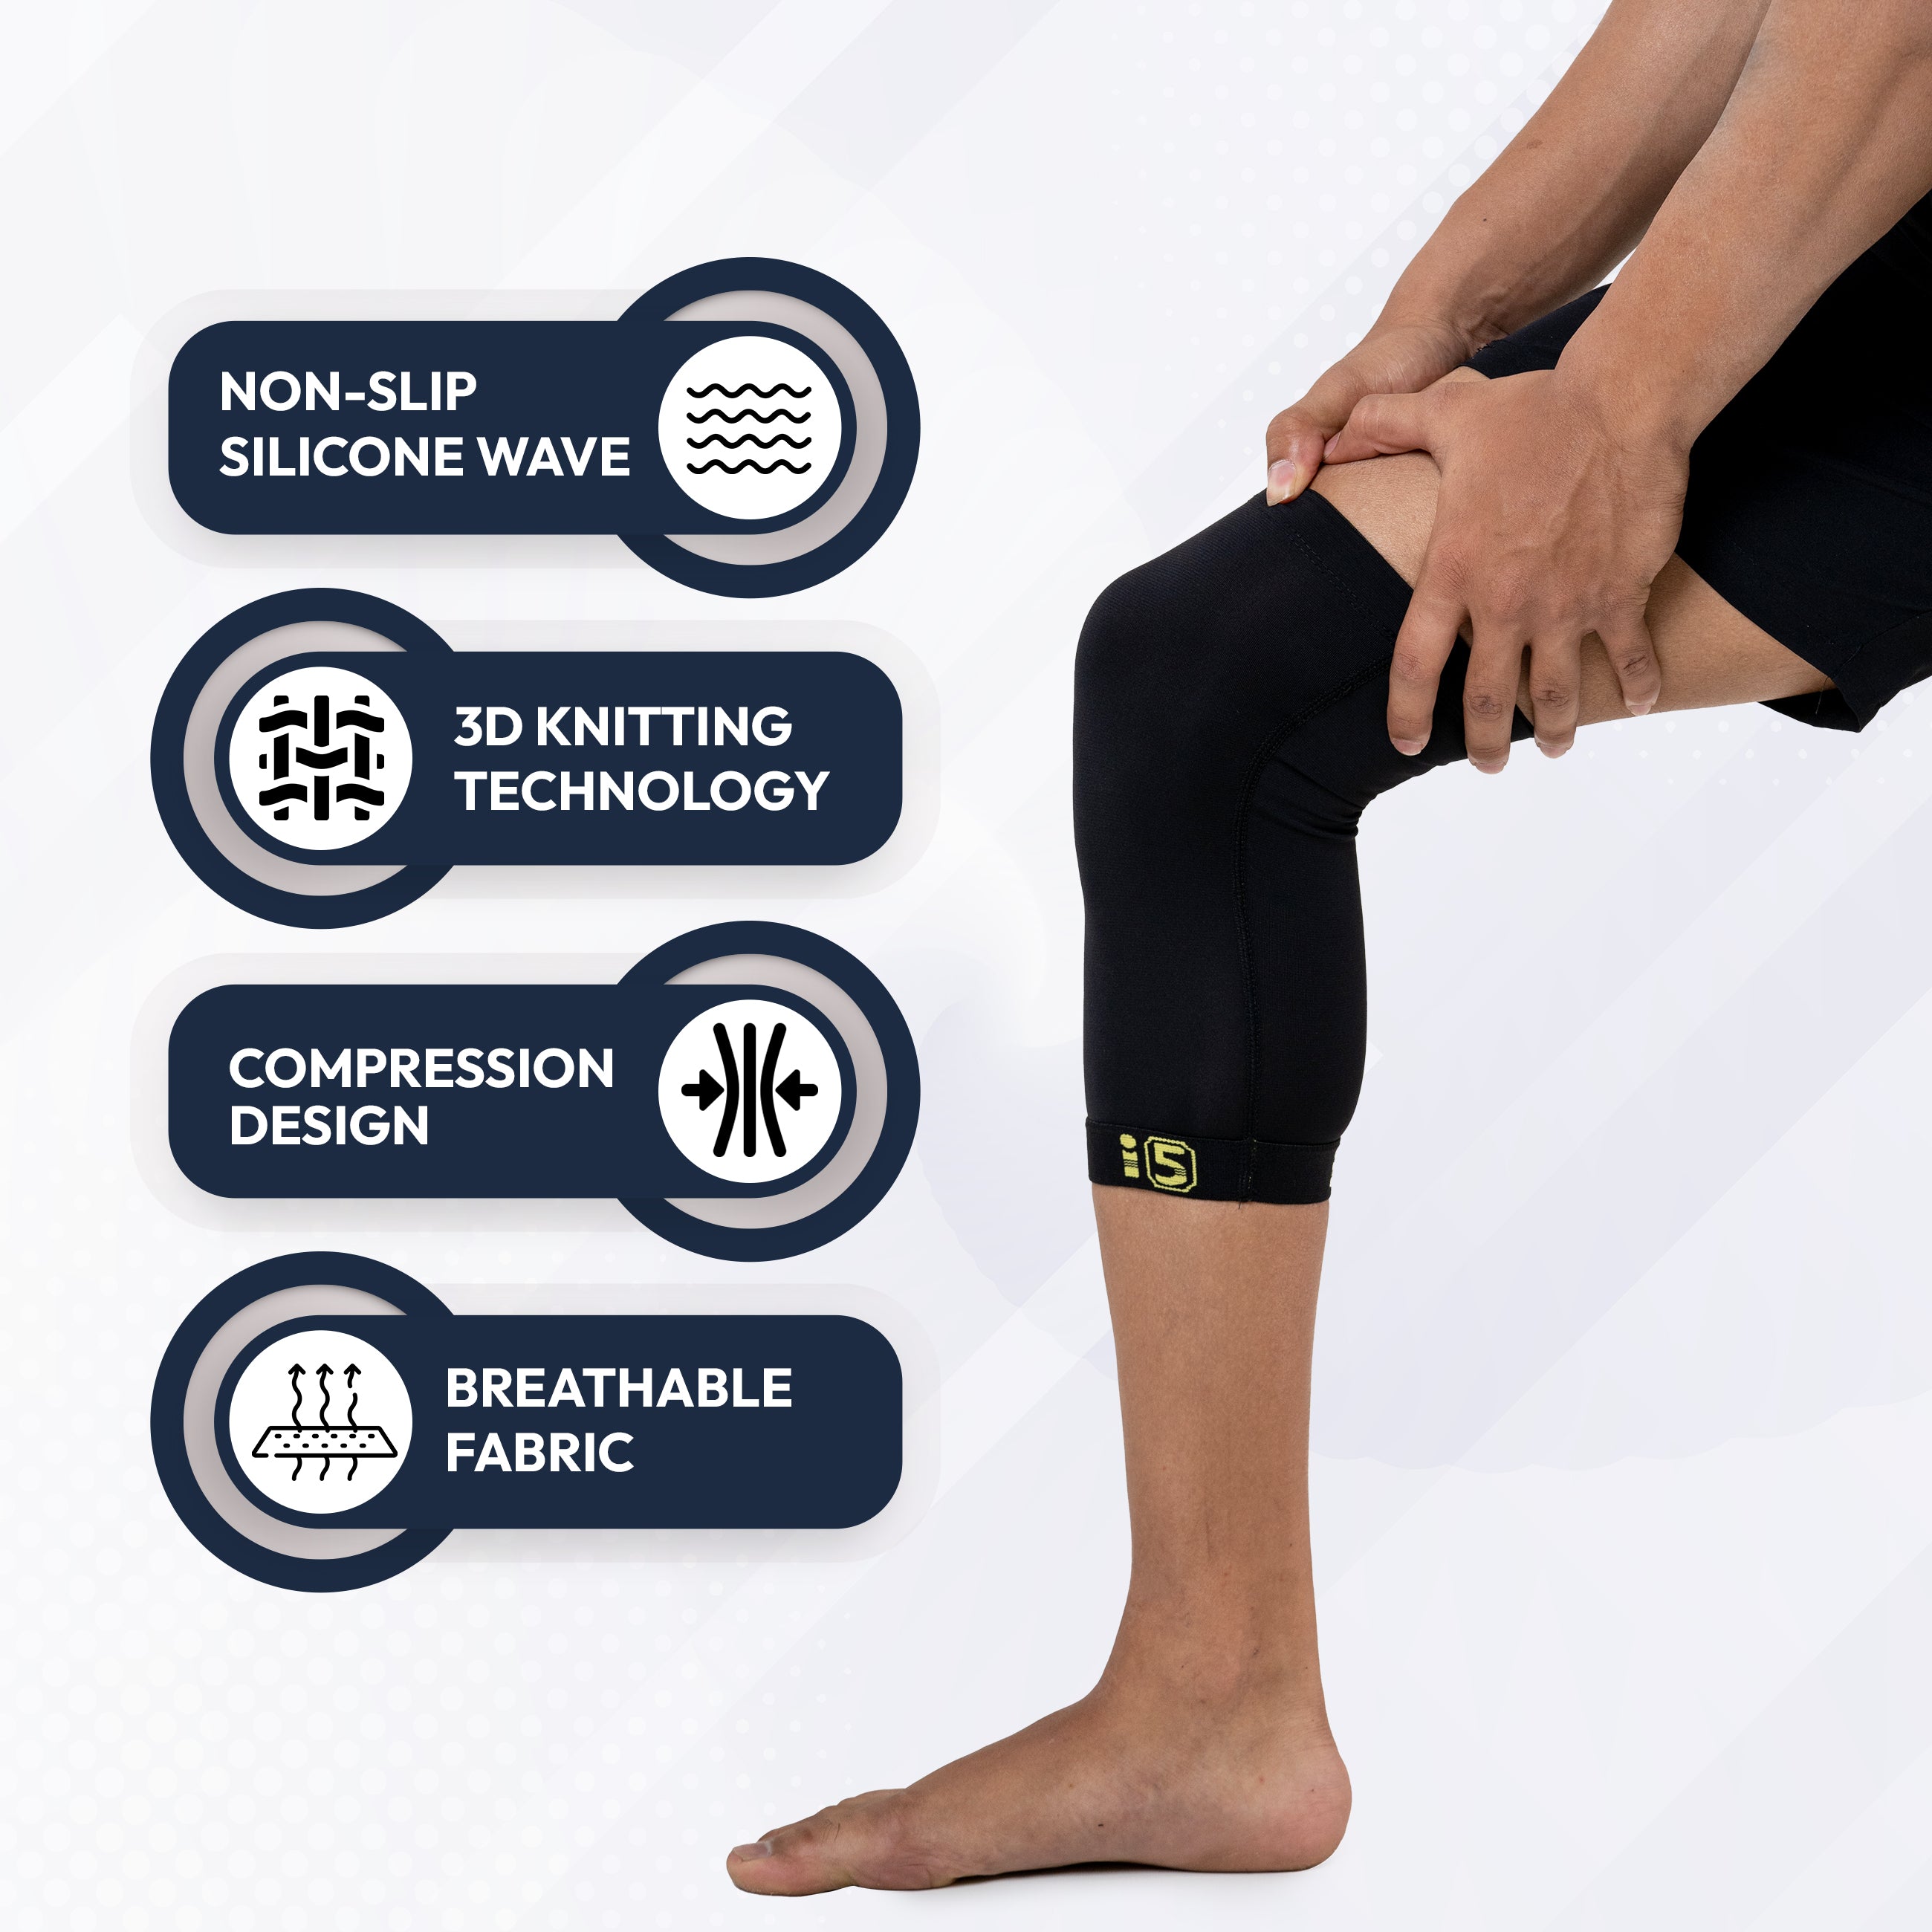 I5Joints-Copper Compression Knee Sleeve(Copper Compression Knee Support Sleeve for Pain Swelling Arthritis Running Jogging Pain Relief Compression Sleeve Joint Pain knee))